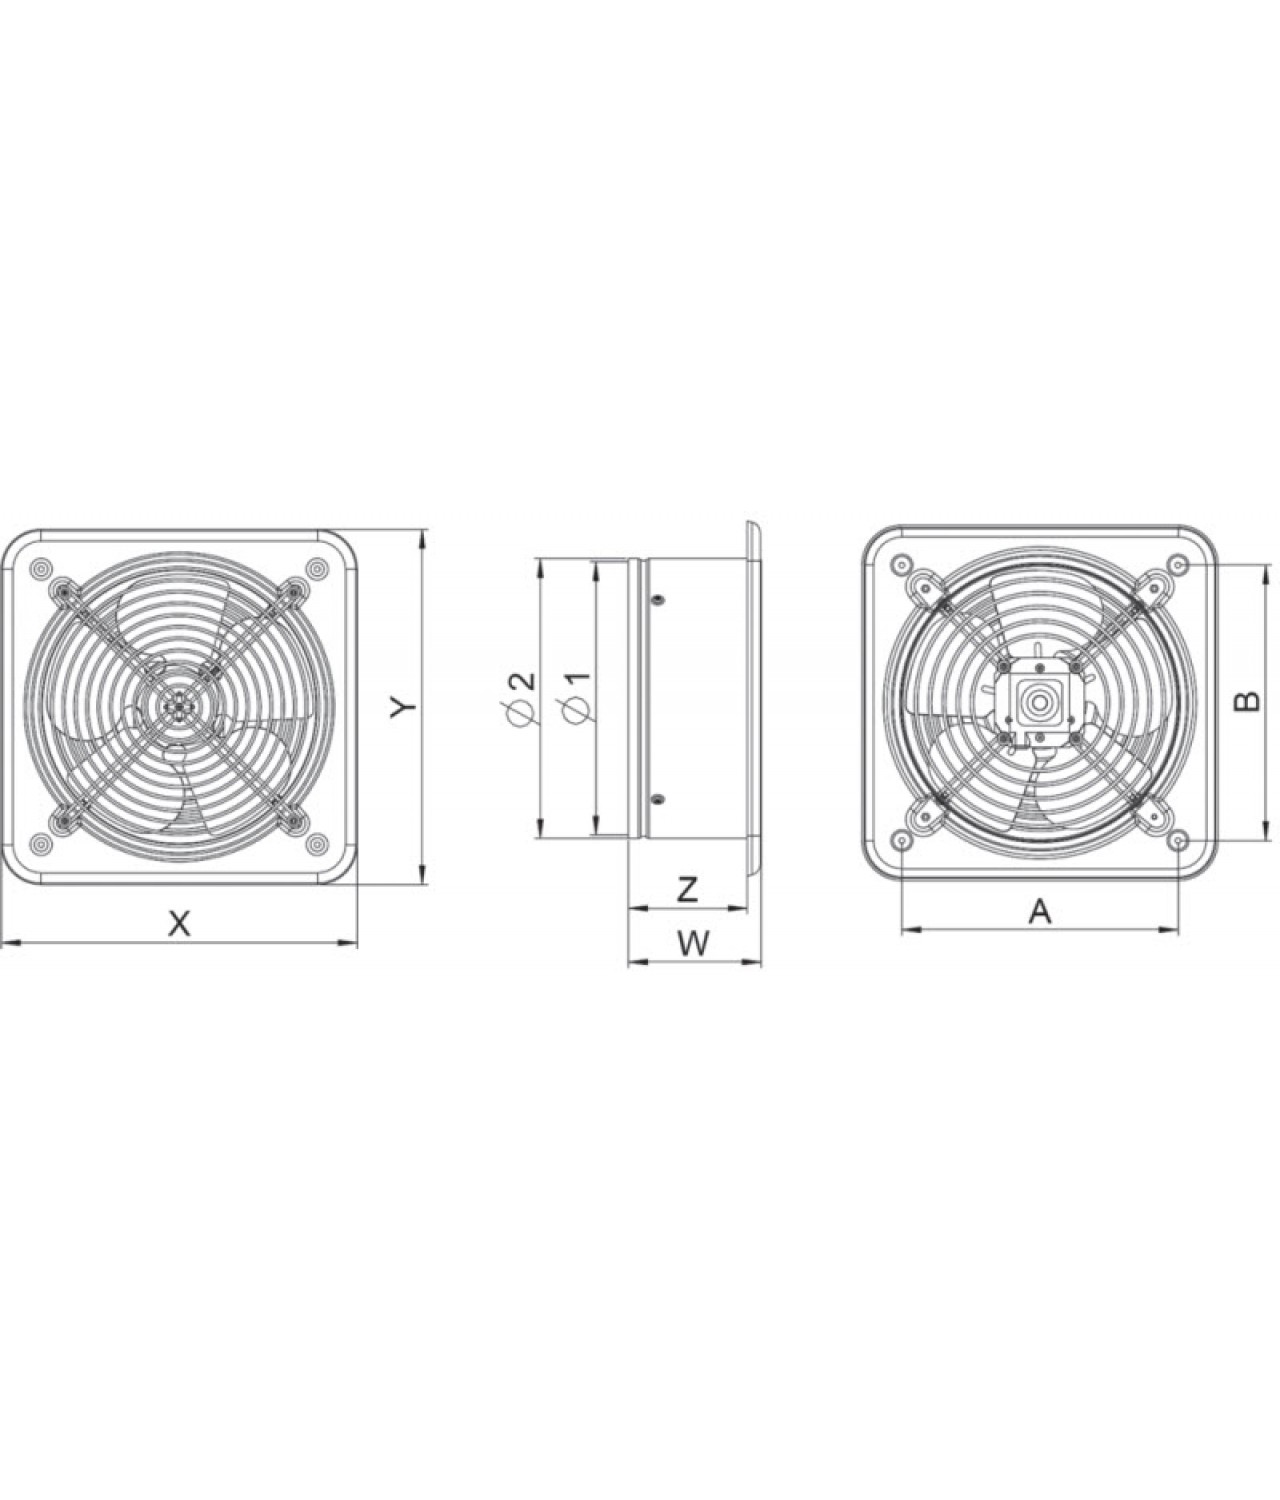 Axial fans WO ≤1025 m³/h - drawing